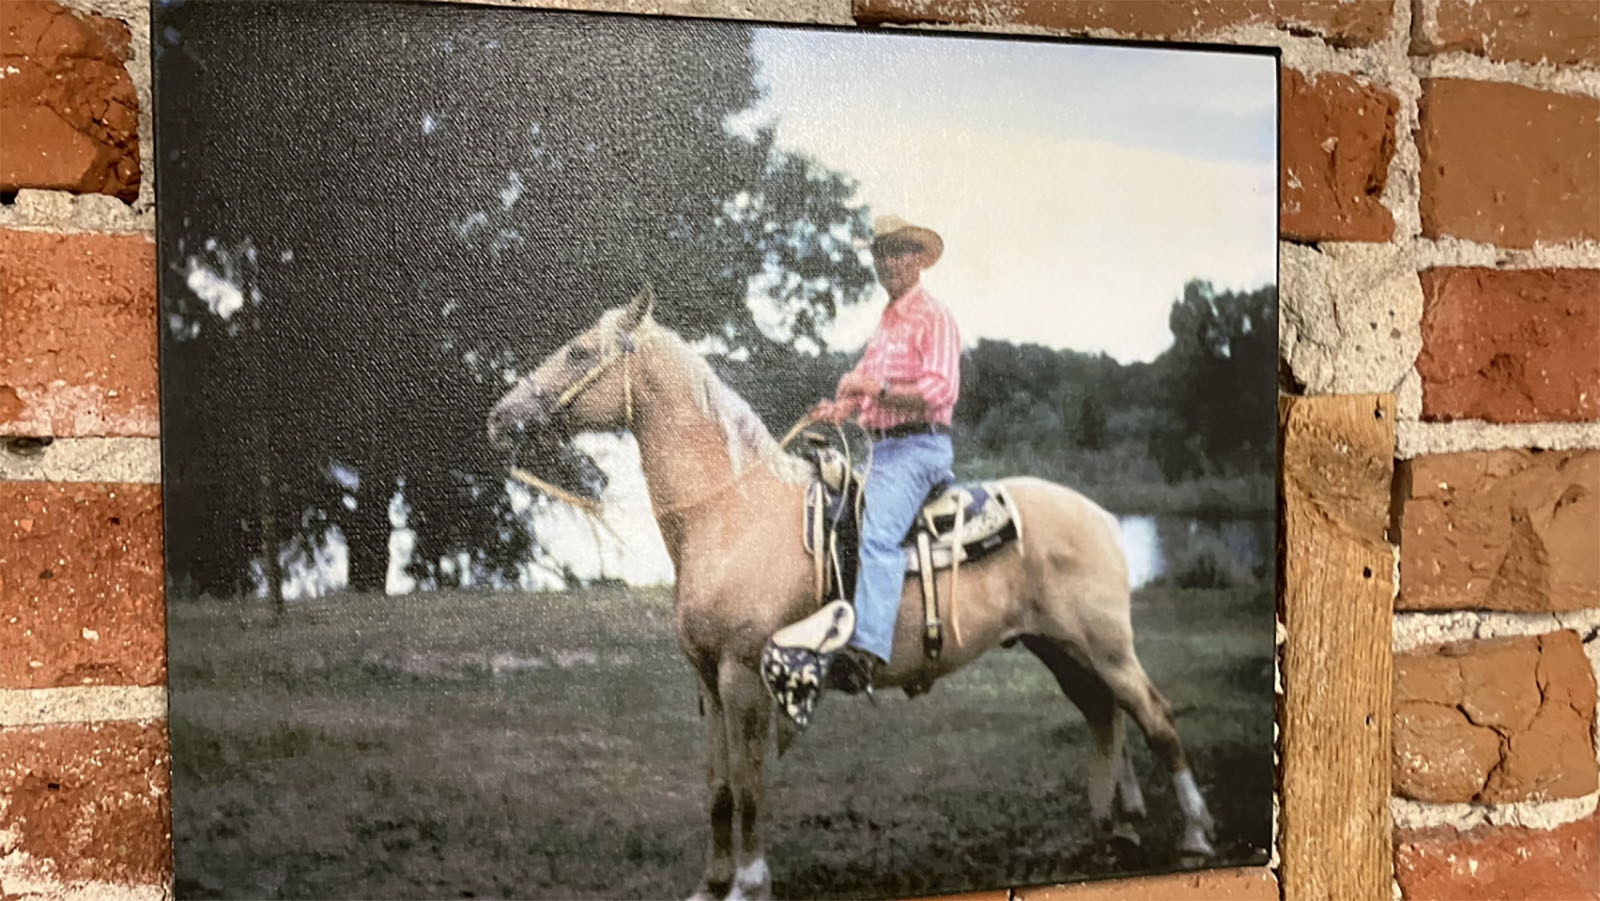 C.W. “Curt” Taubert was born in Germany and would arrive in Wyoming in 1909 and begin his career as a cowboy. This photo hangs above the desk of Louis Taubert Jr.